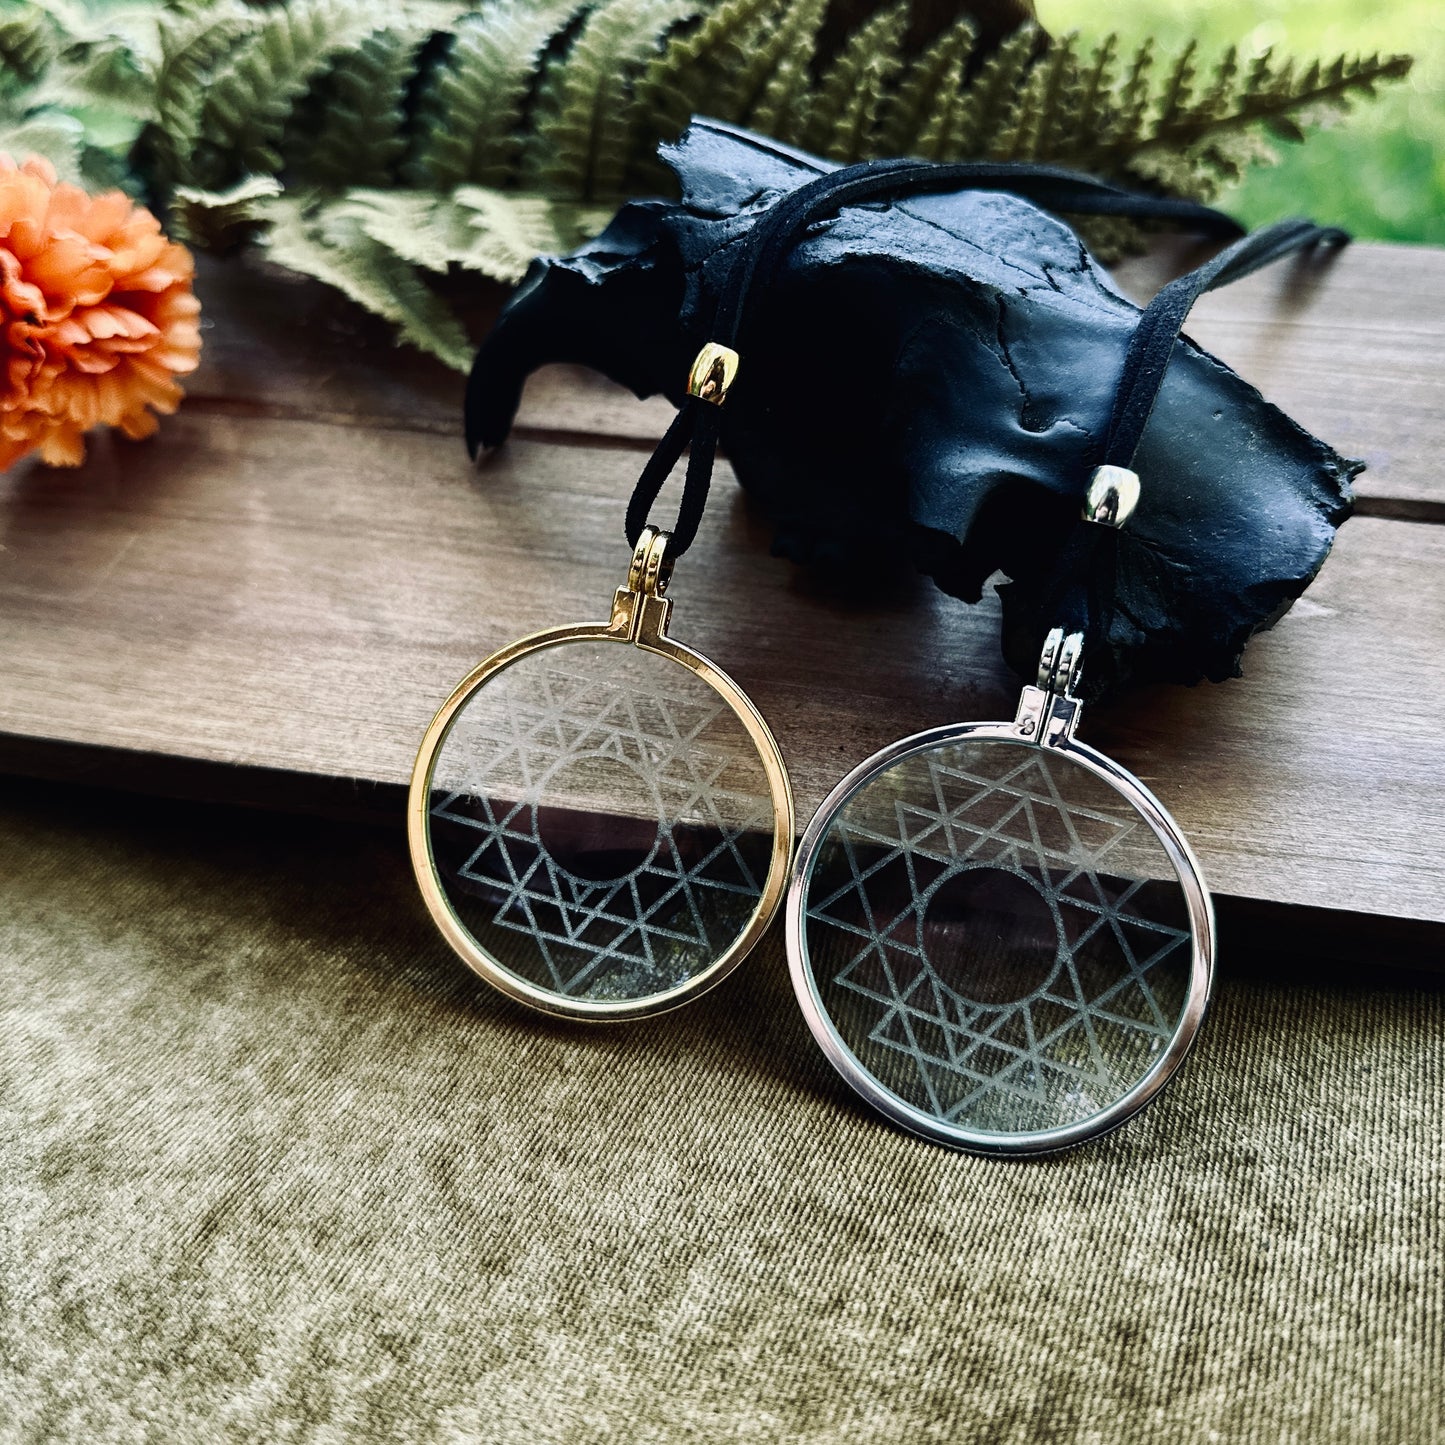 Sri Yantra Solar Lighter, Magnifying Glass Necklace, Sustainable Jewelry, Cannabis Accessory, Triangle Necklace, Triangle Necklace, Meditation Jewelry, Yoga Necklace, Mantra Jewelry